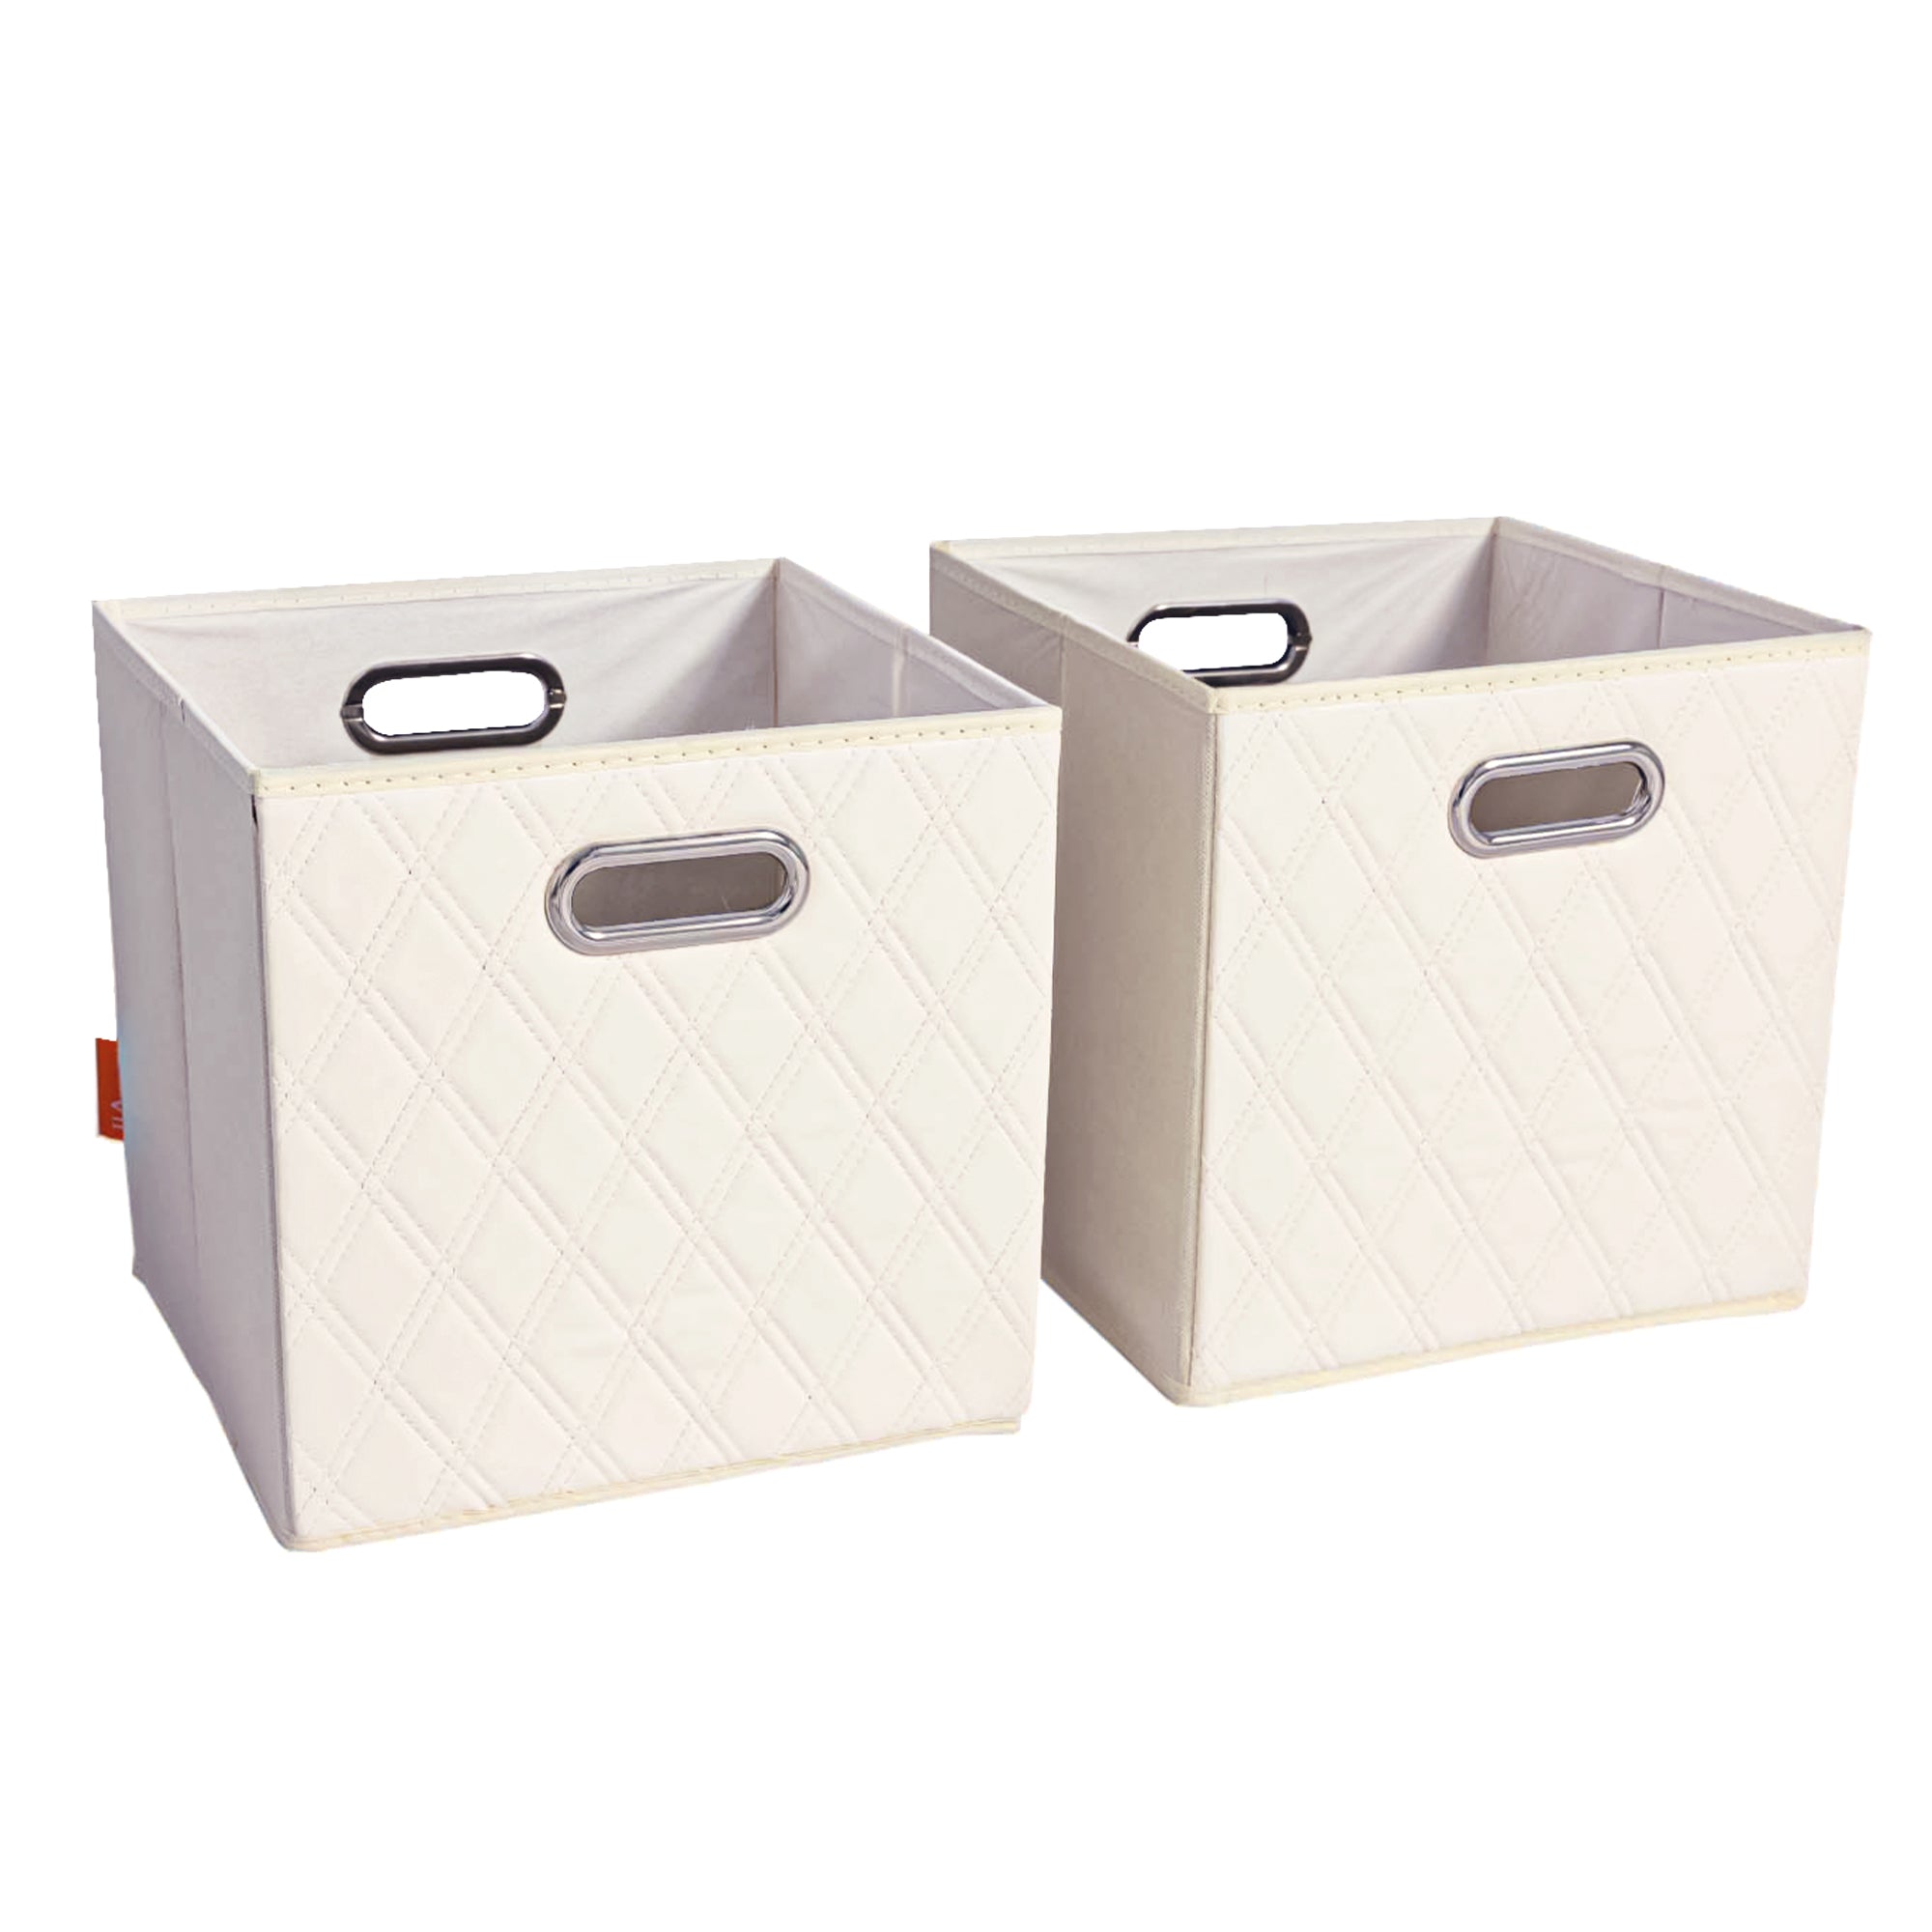 JIAessentials 13 inch Foldable Diamond Patterned Faux Leather Storage Cube Bins Set of Two with Dual Handles - 13" Beige